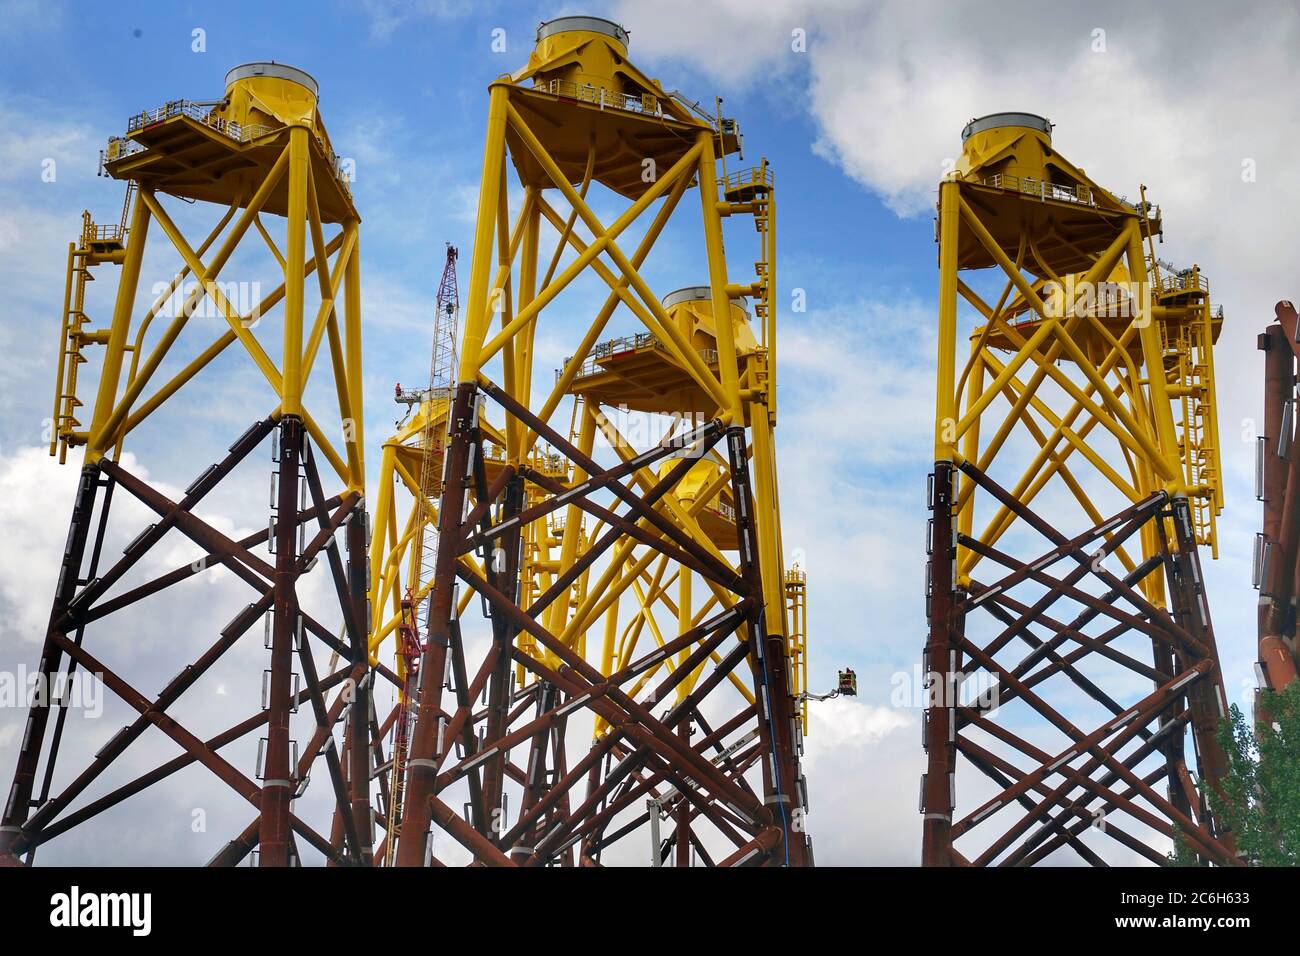 The bases of offshore wind turbines tower over the sky line on the banks of the River Tyne before they are towed out to sea. Stock Photo